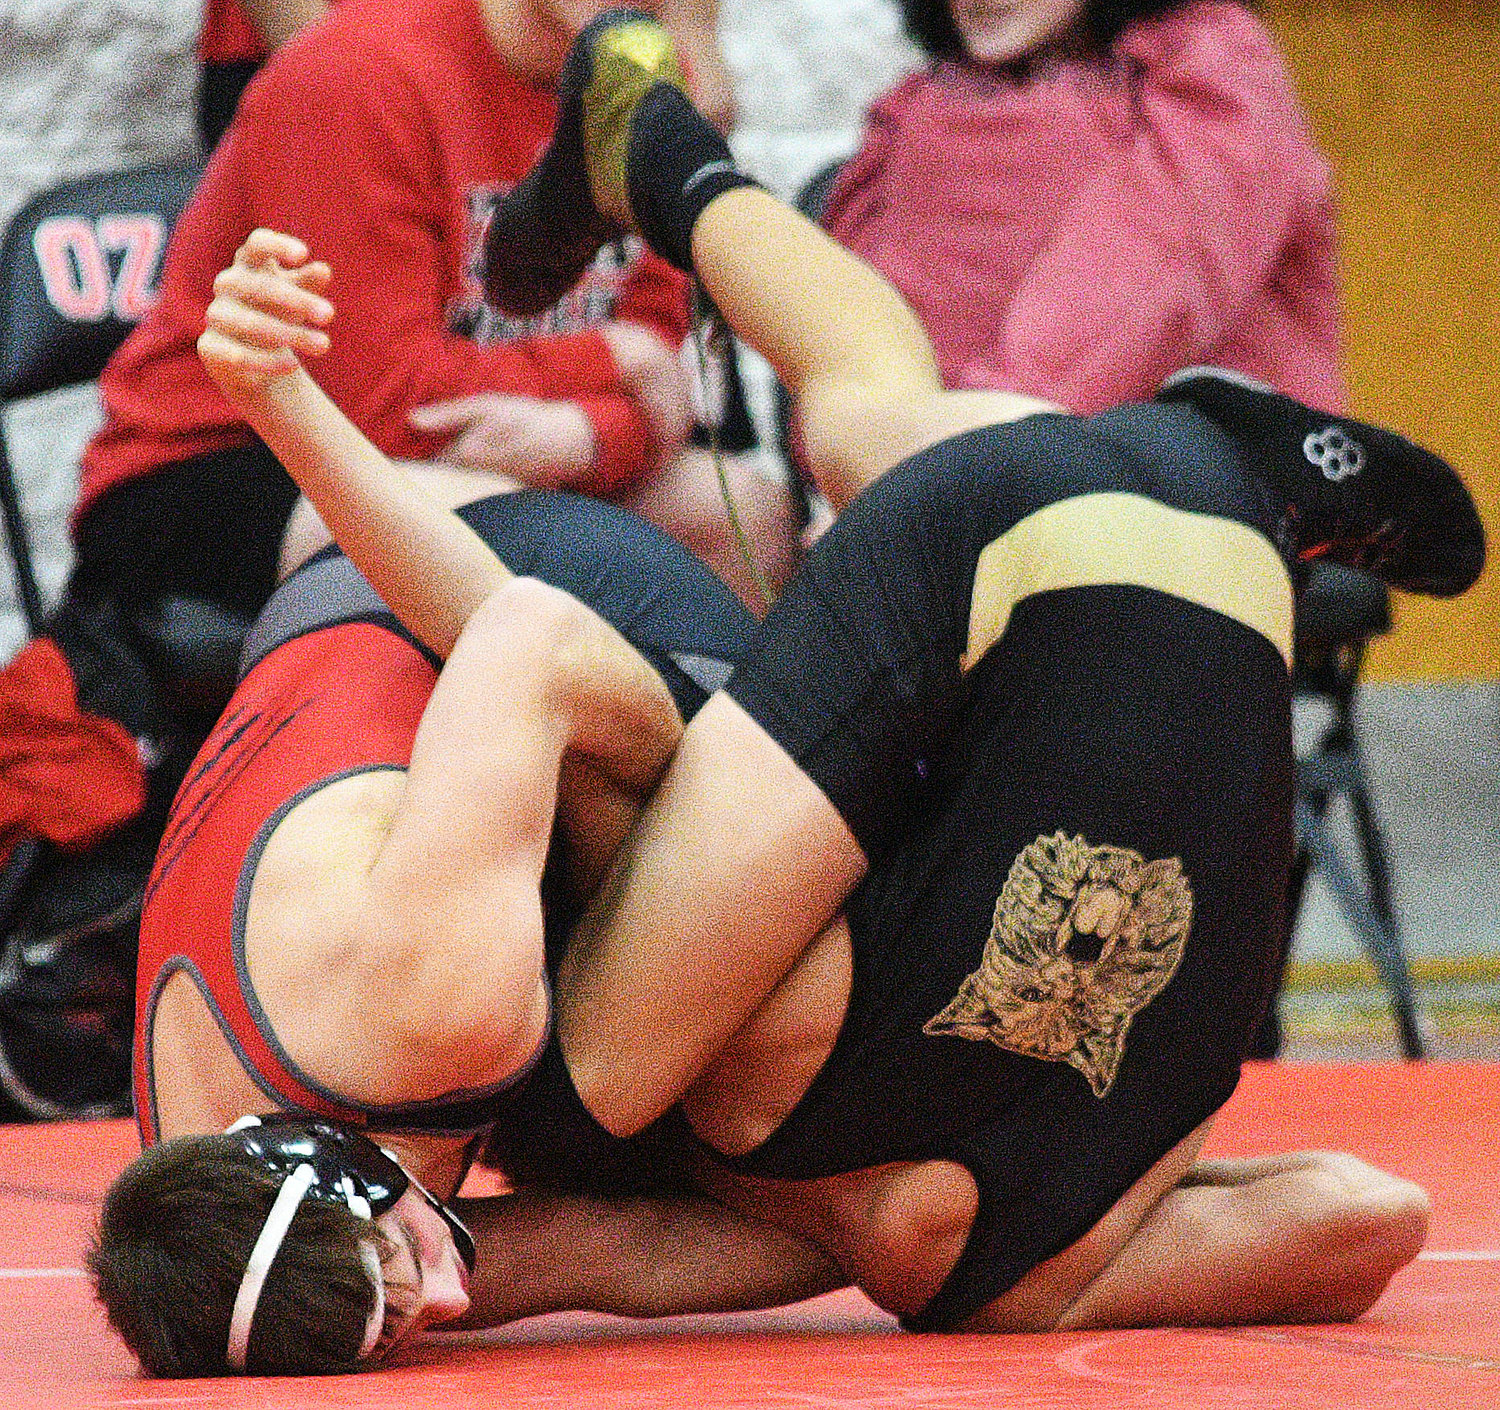 BRAXTON STRICK sets himself up for a win by fall.